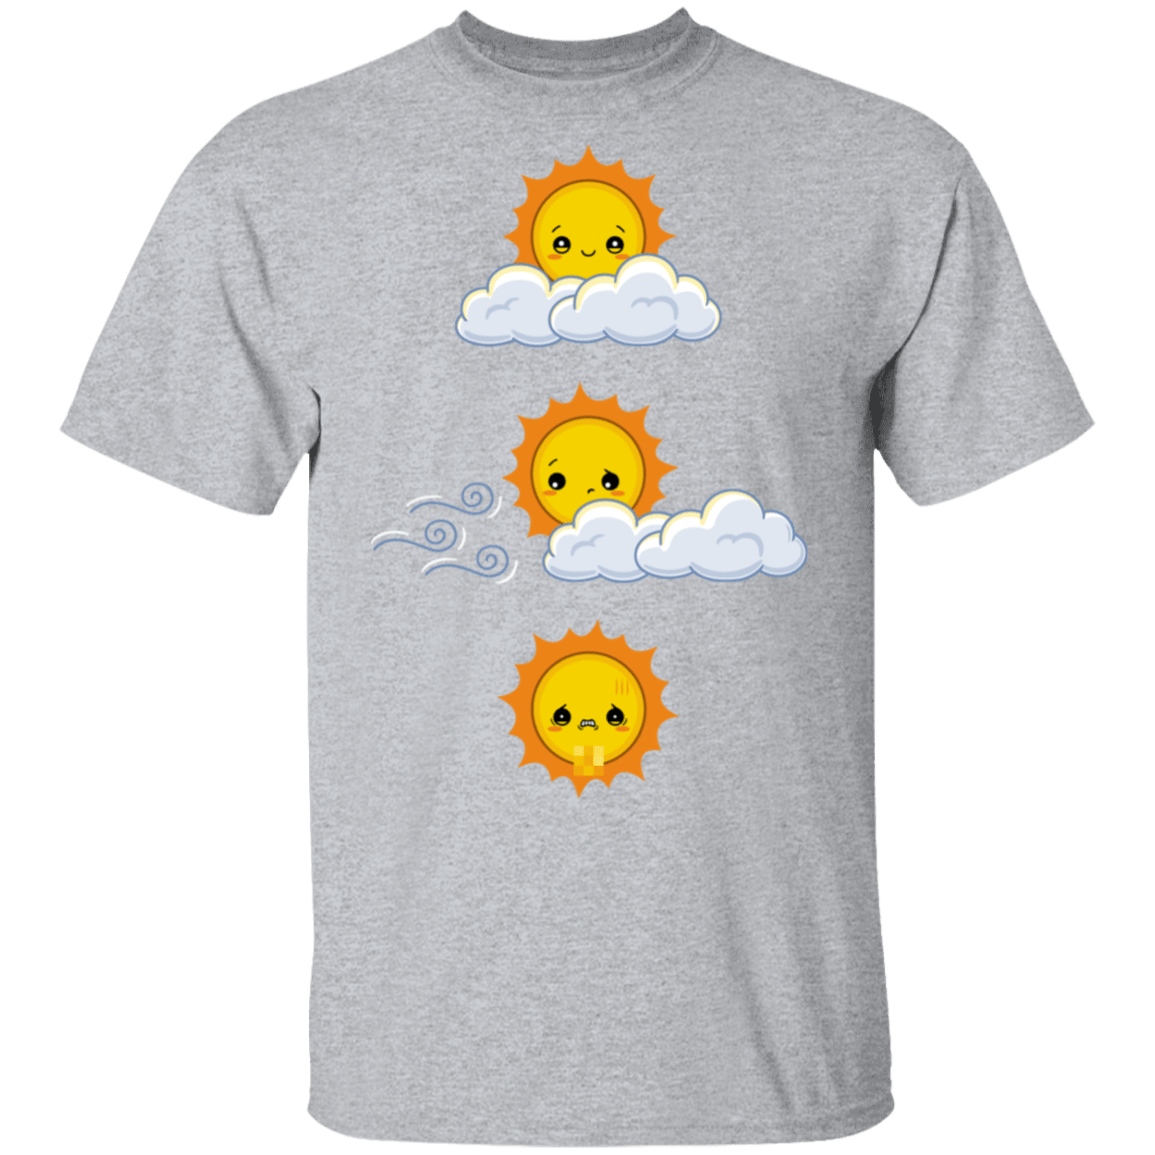 T-Shirts Sport Grey / S Unexpected Wind T-Shirt